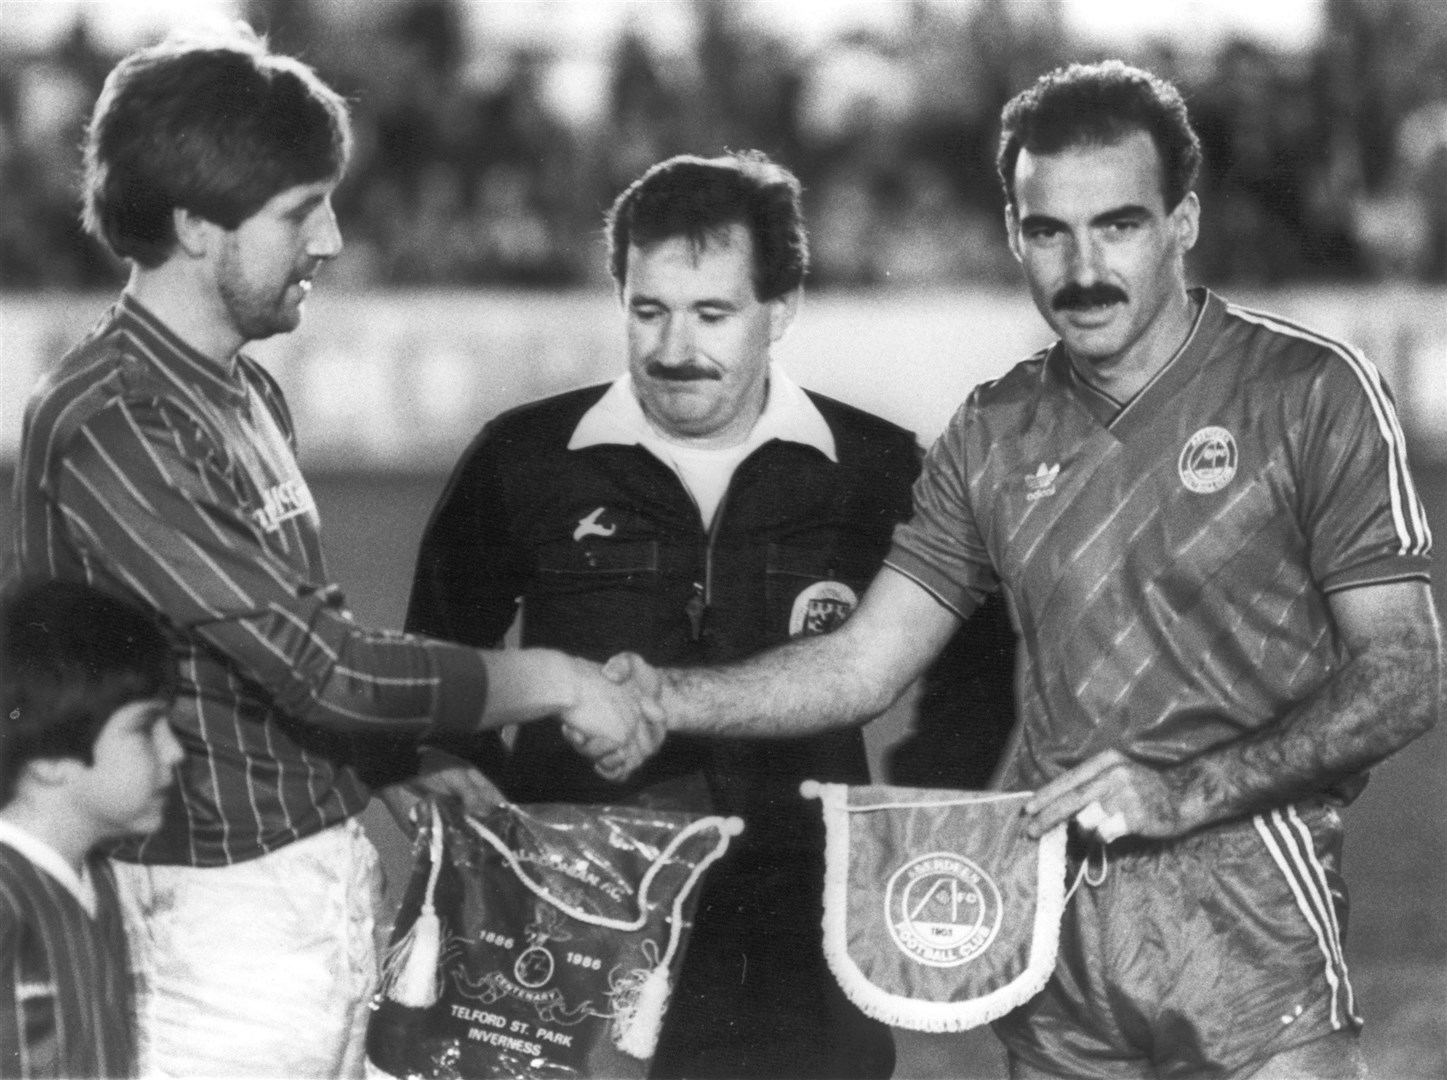 Bob Summers of Caley and Willie Miller of Aberdeen swap pennants at the start of the centenary match in November 1986. Aberdeen won 5-1 in what was their final match under Alex Ferguson.